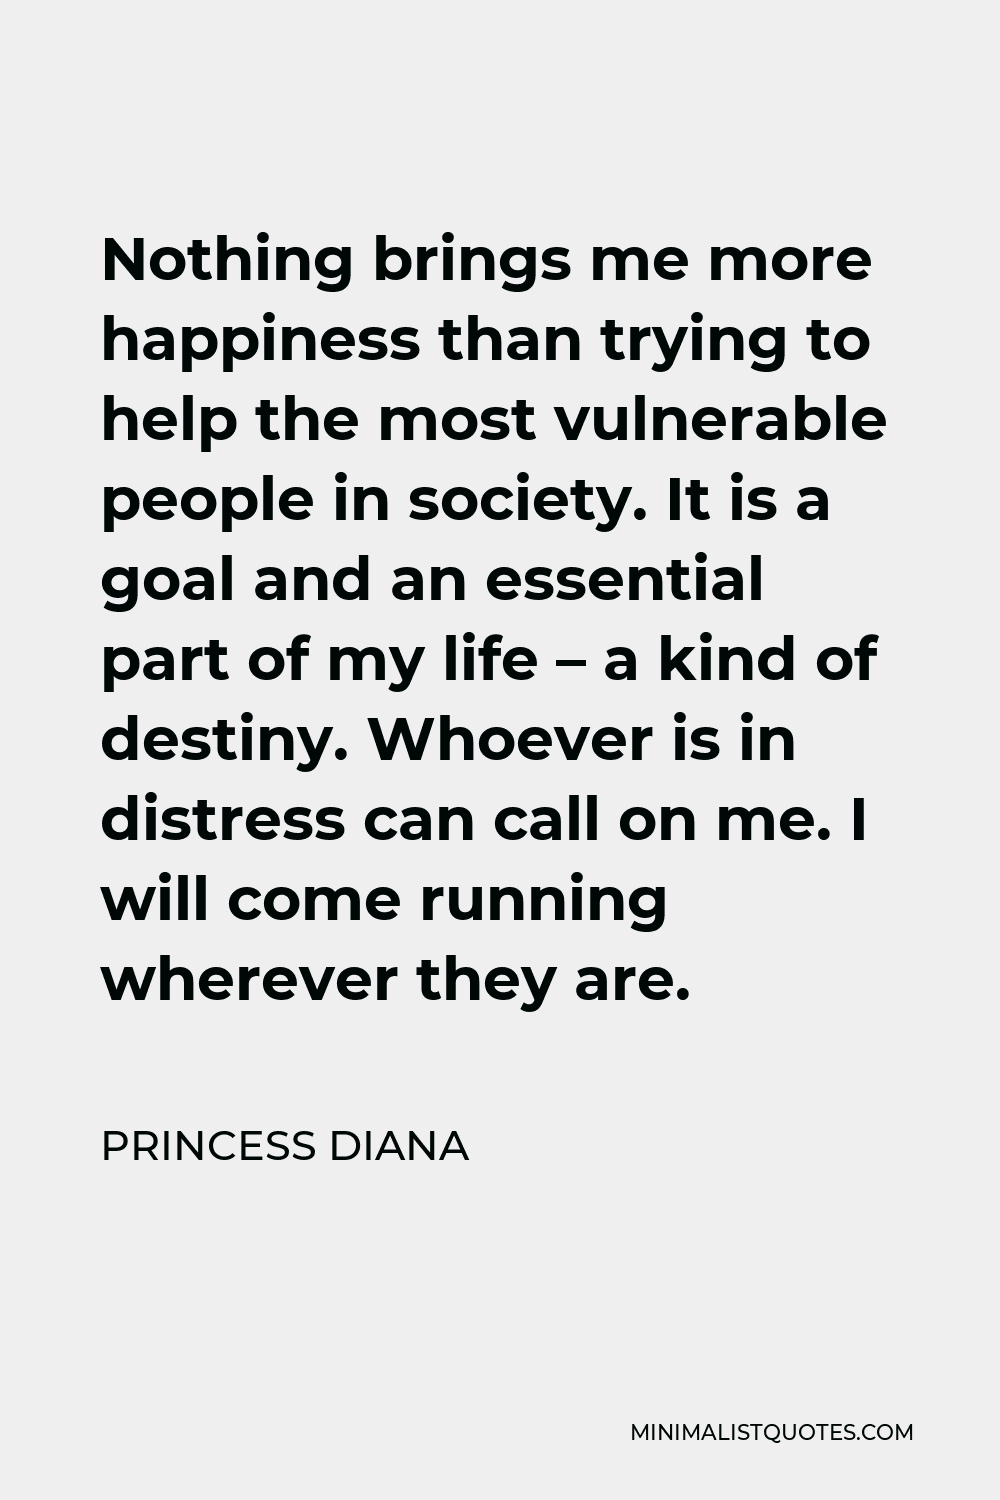 Princess Diana Quote - Nothing brings me more happiness than trying to help the most vulnerable people in society. It is a goal and an essential part of my life – a kind of destiny. Whoever is in distress can call on me. I will come running wherever they are.